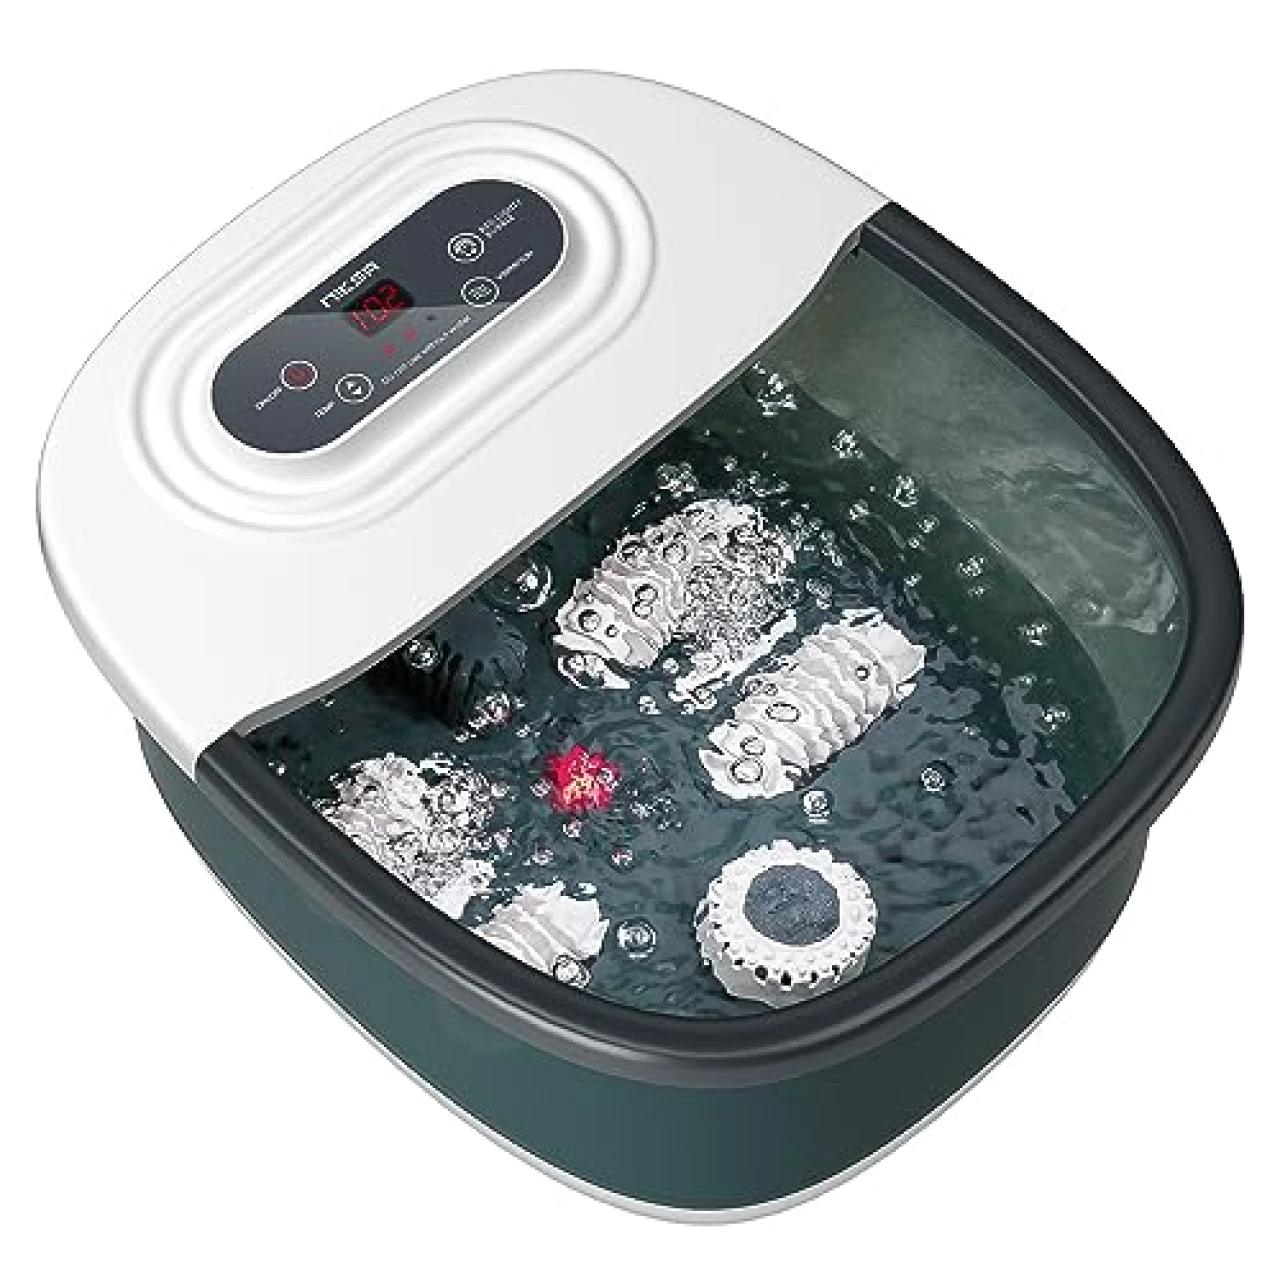 Niksa Foot Spa Bath Massager with Heat, Bubbles, Vibration and Red Light